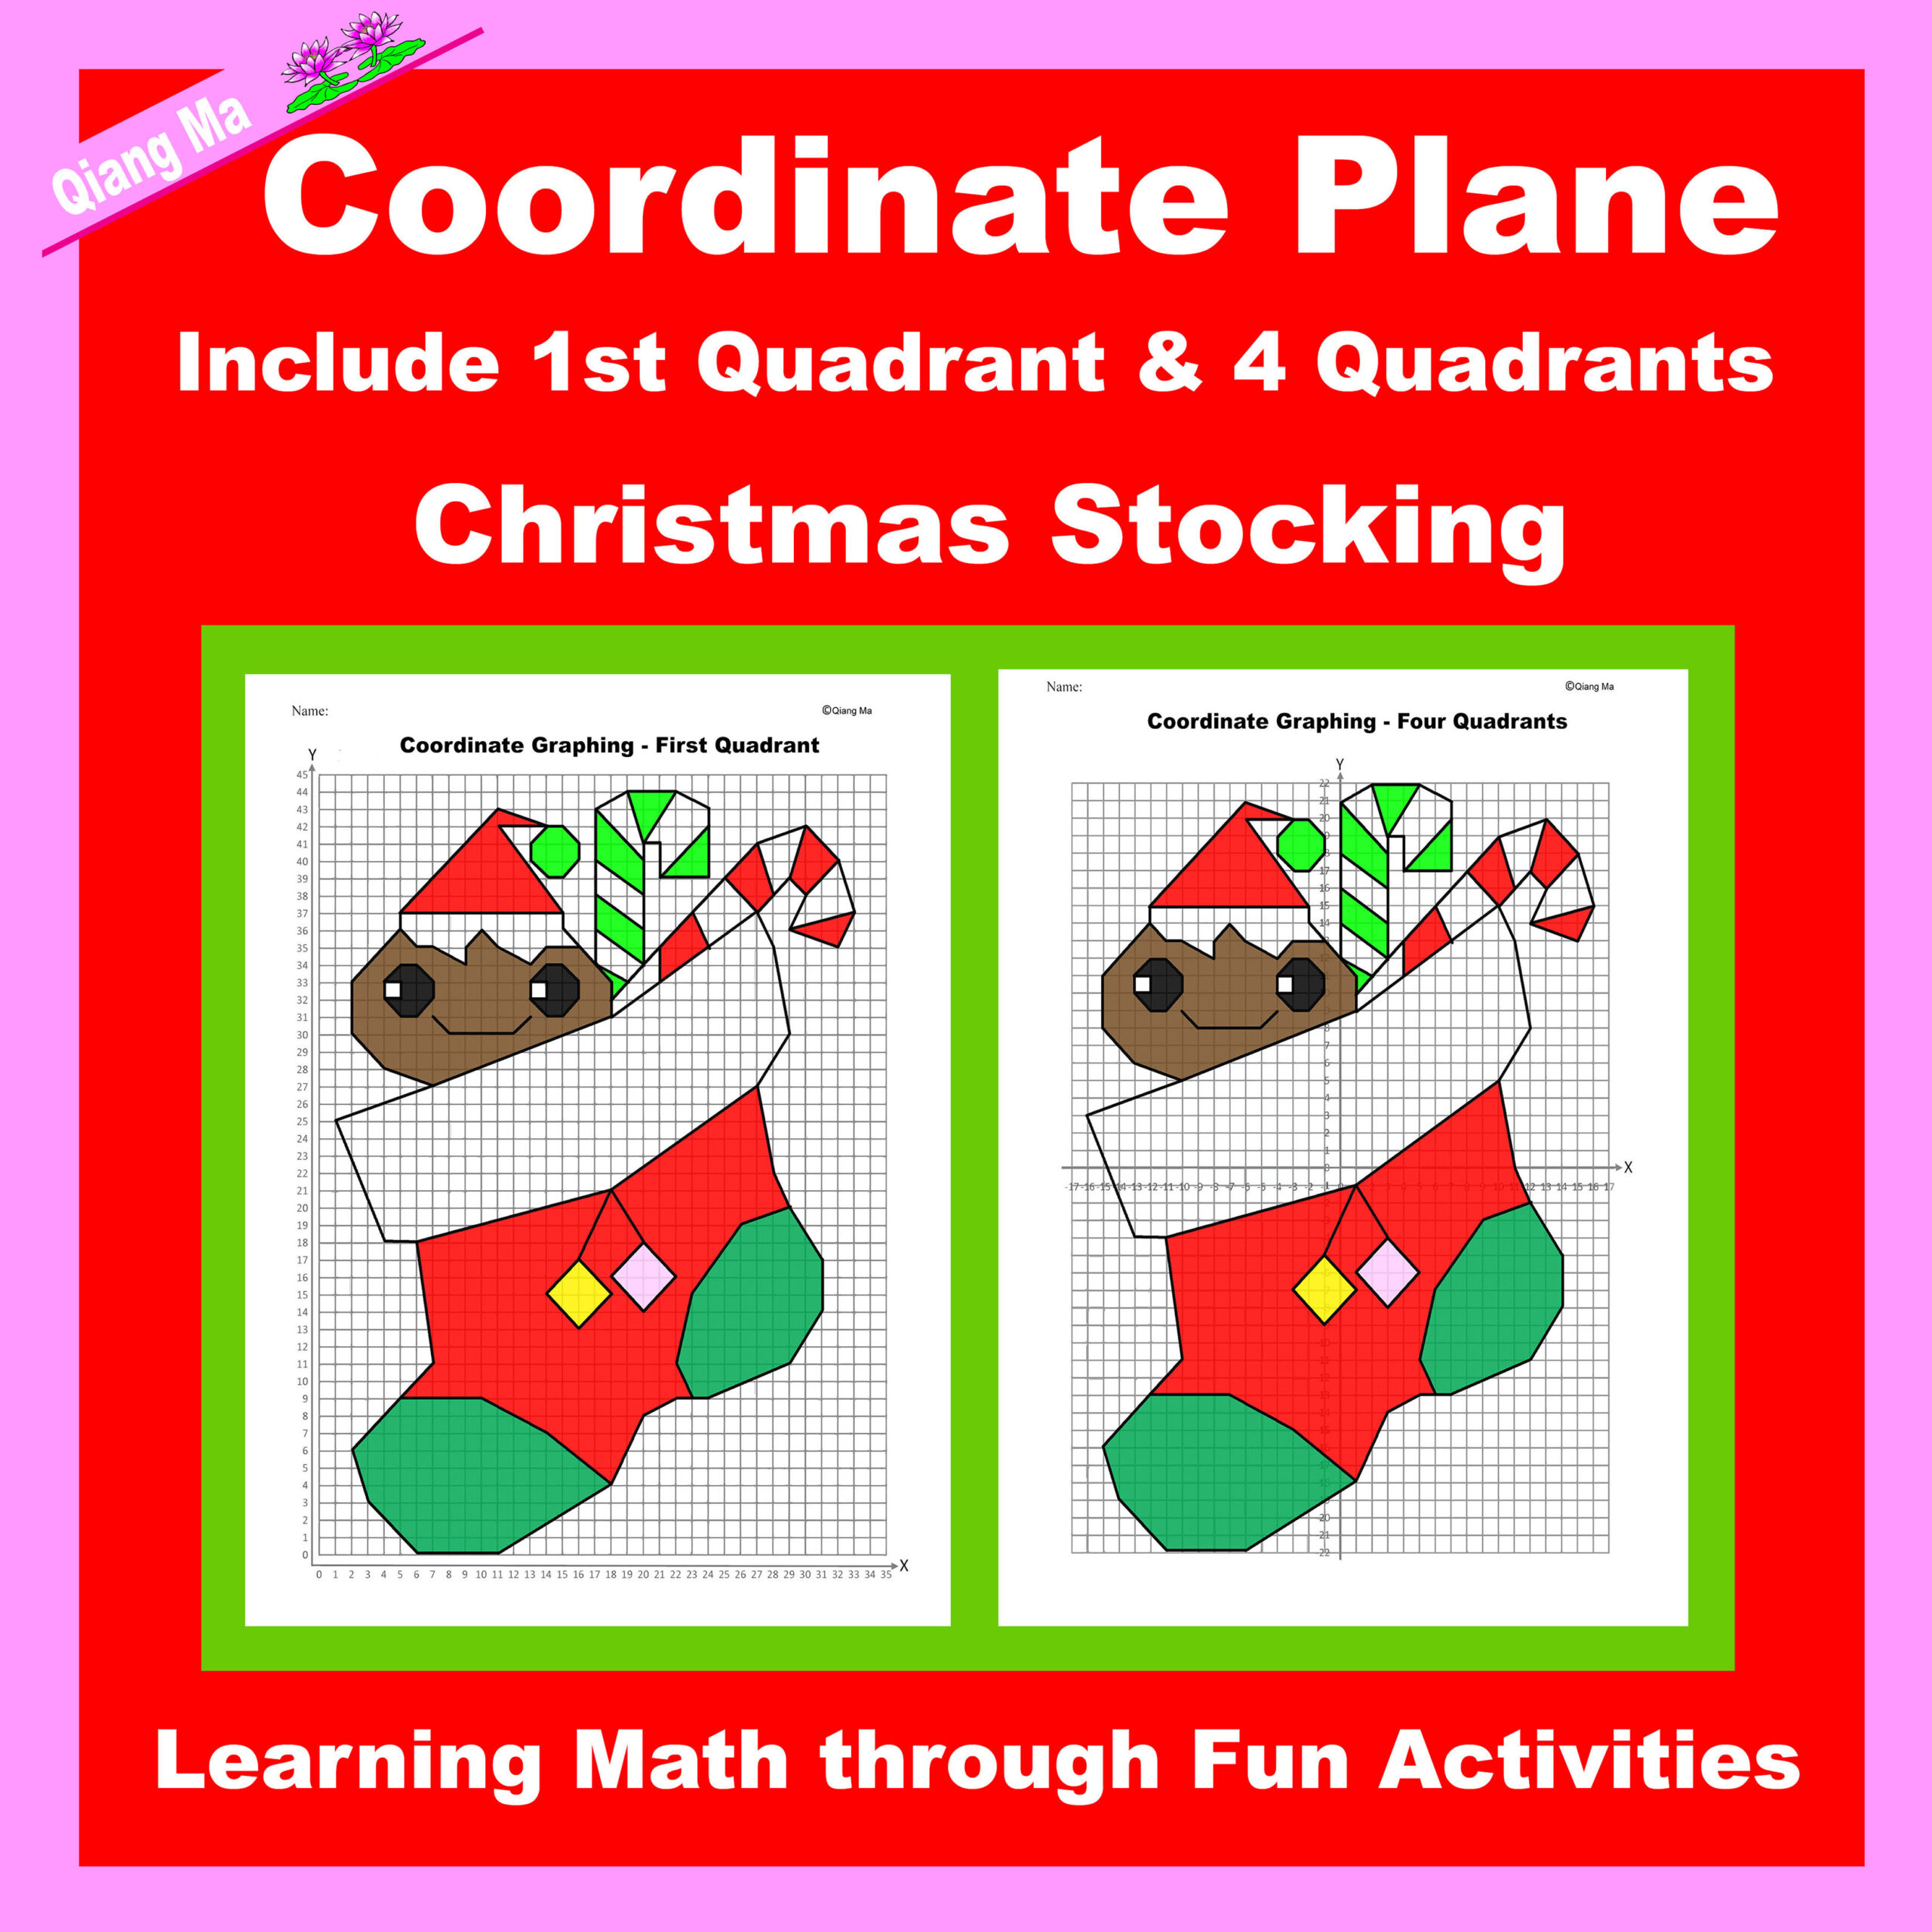 Christmas Coordinate Plane Graphing Picture: Christmas Stocking's featured image